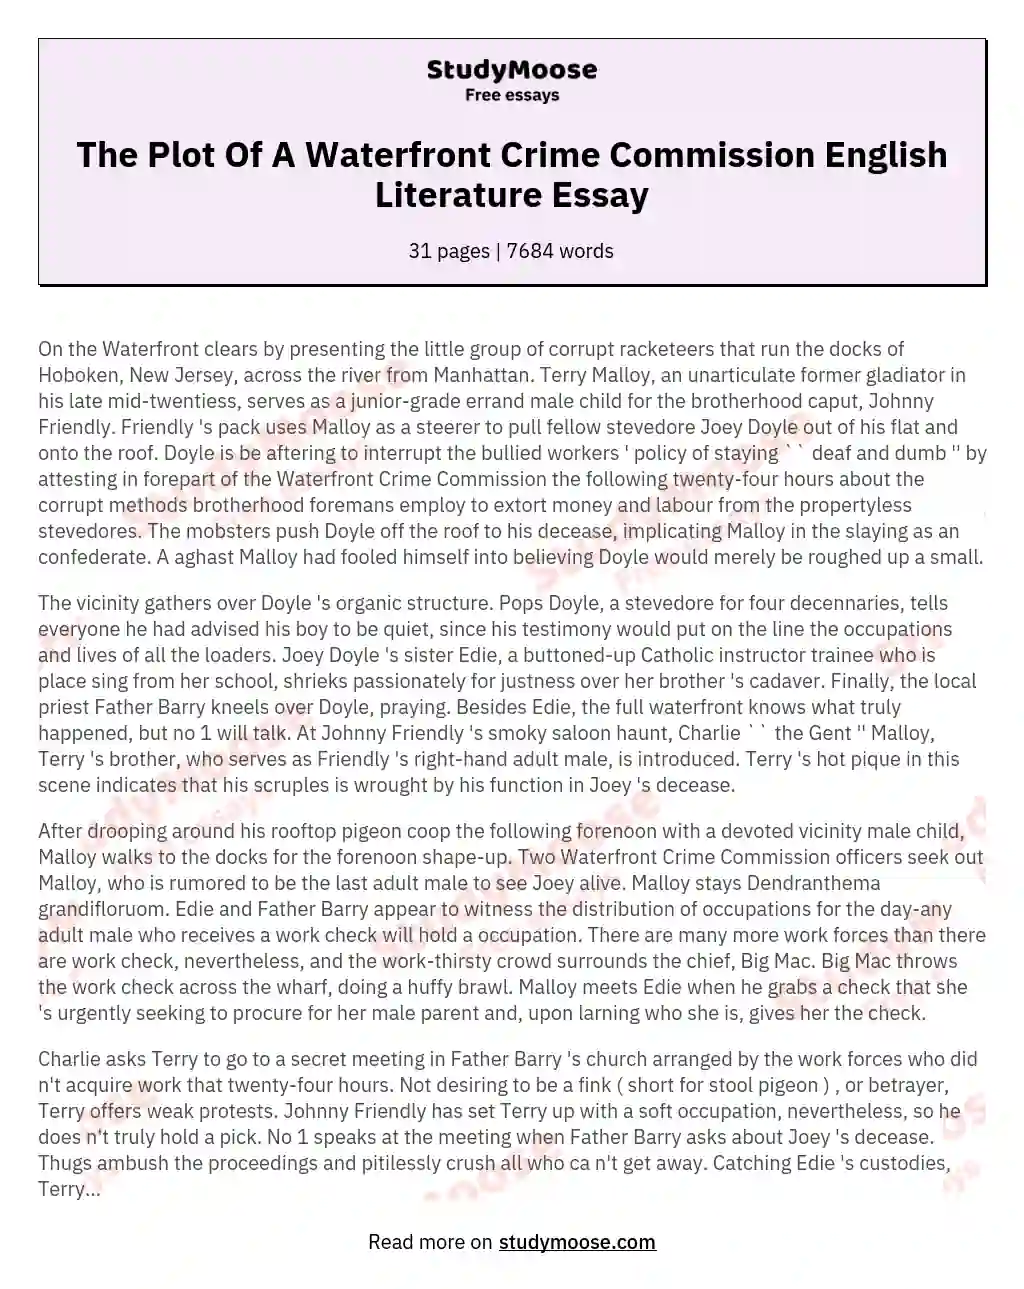 The Plot Of A Waterfront Crime Commission English Literature Essay